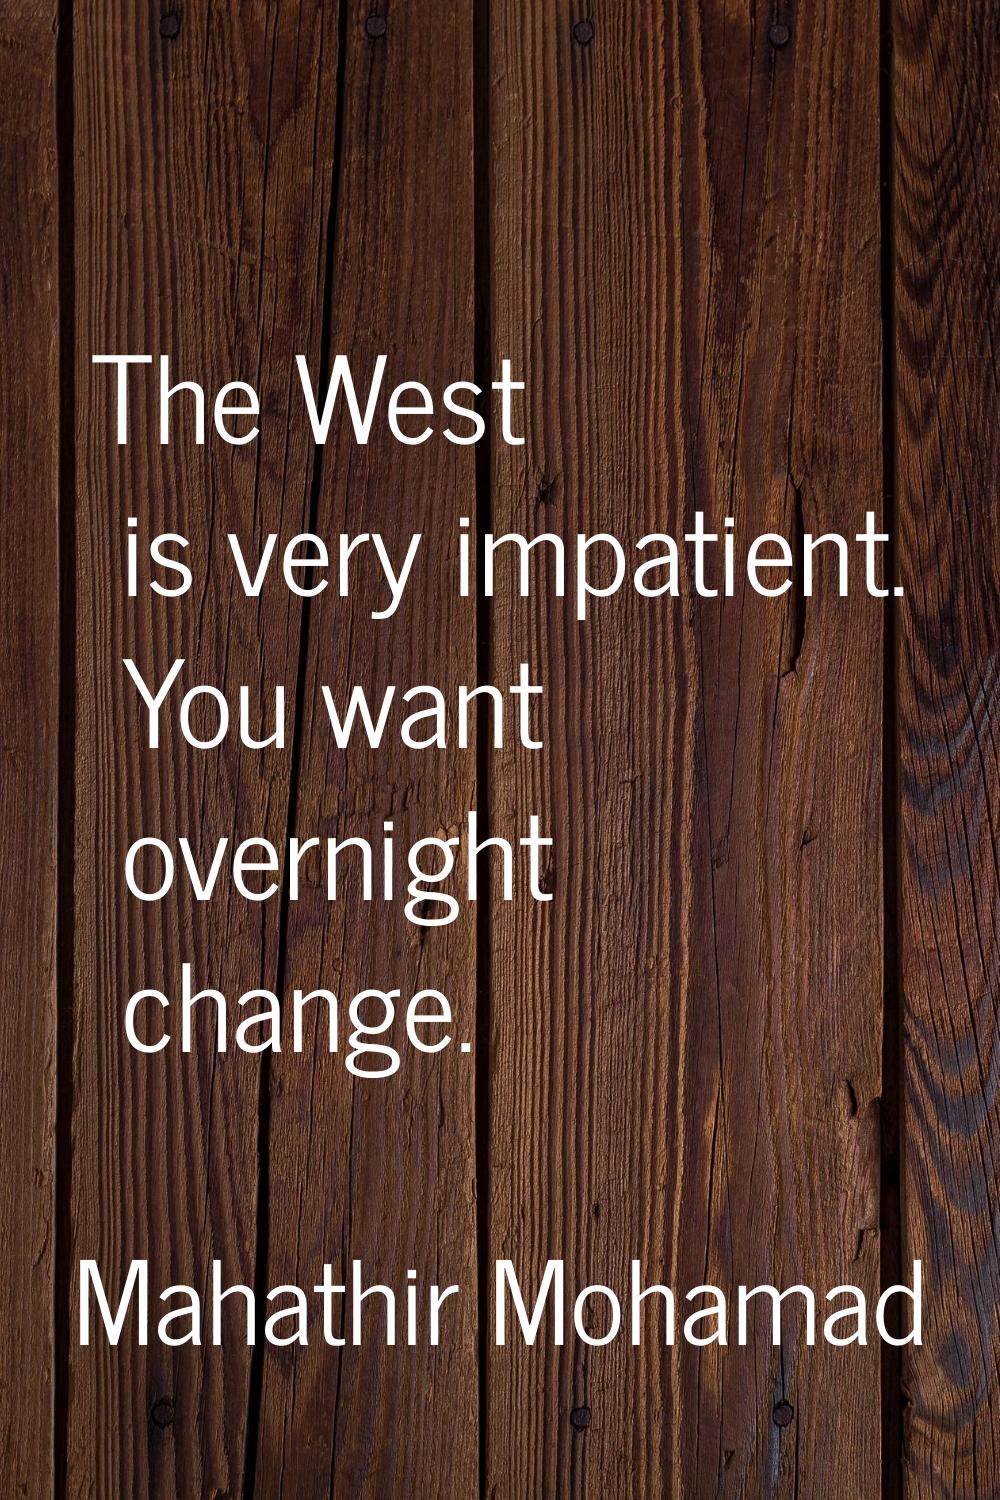 The West is very impatient. You want overnight change.